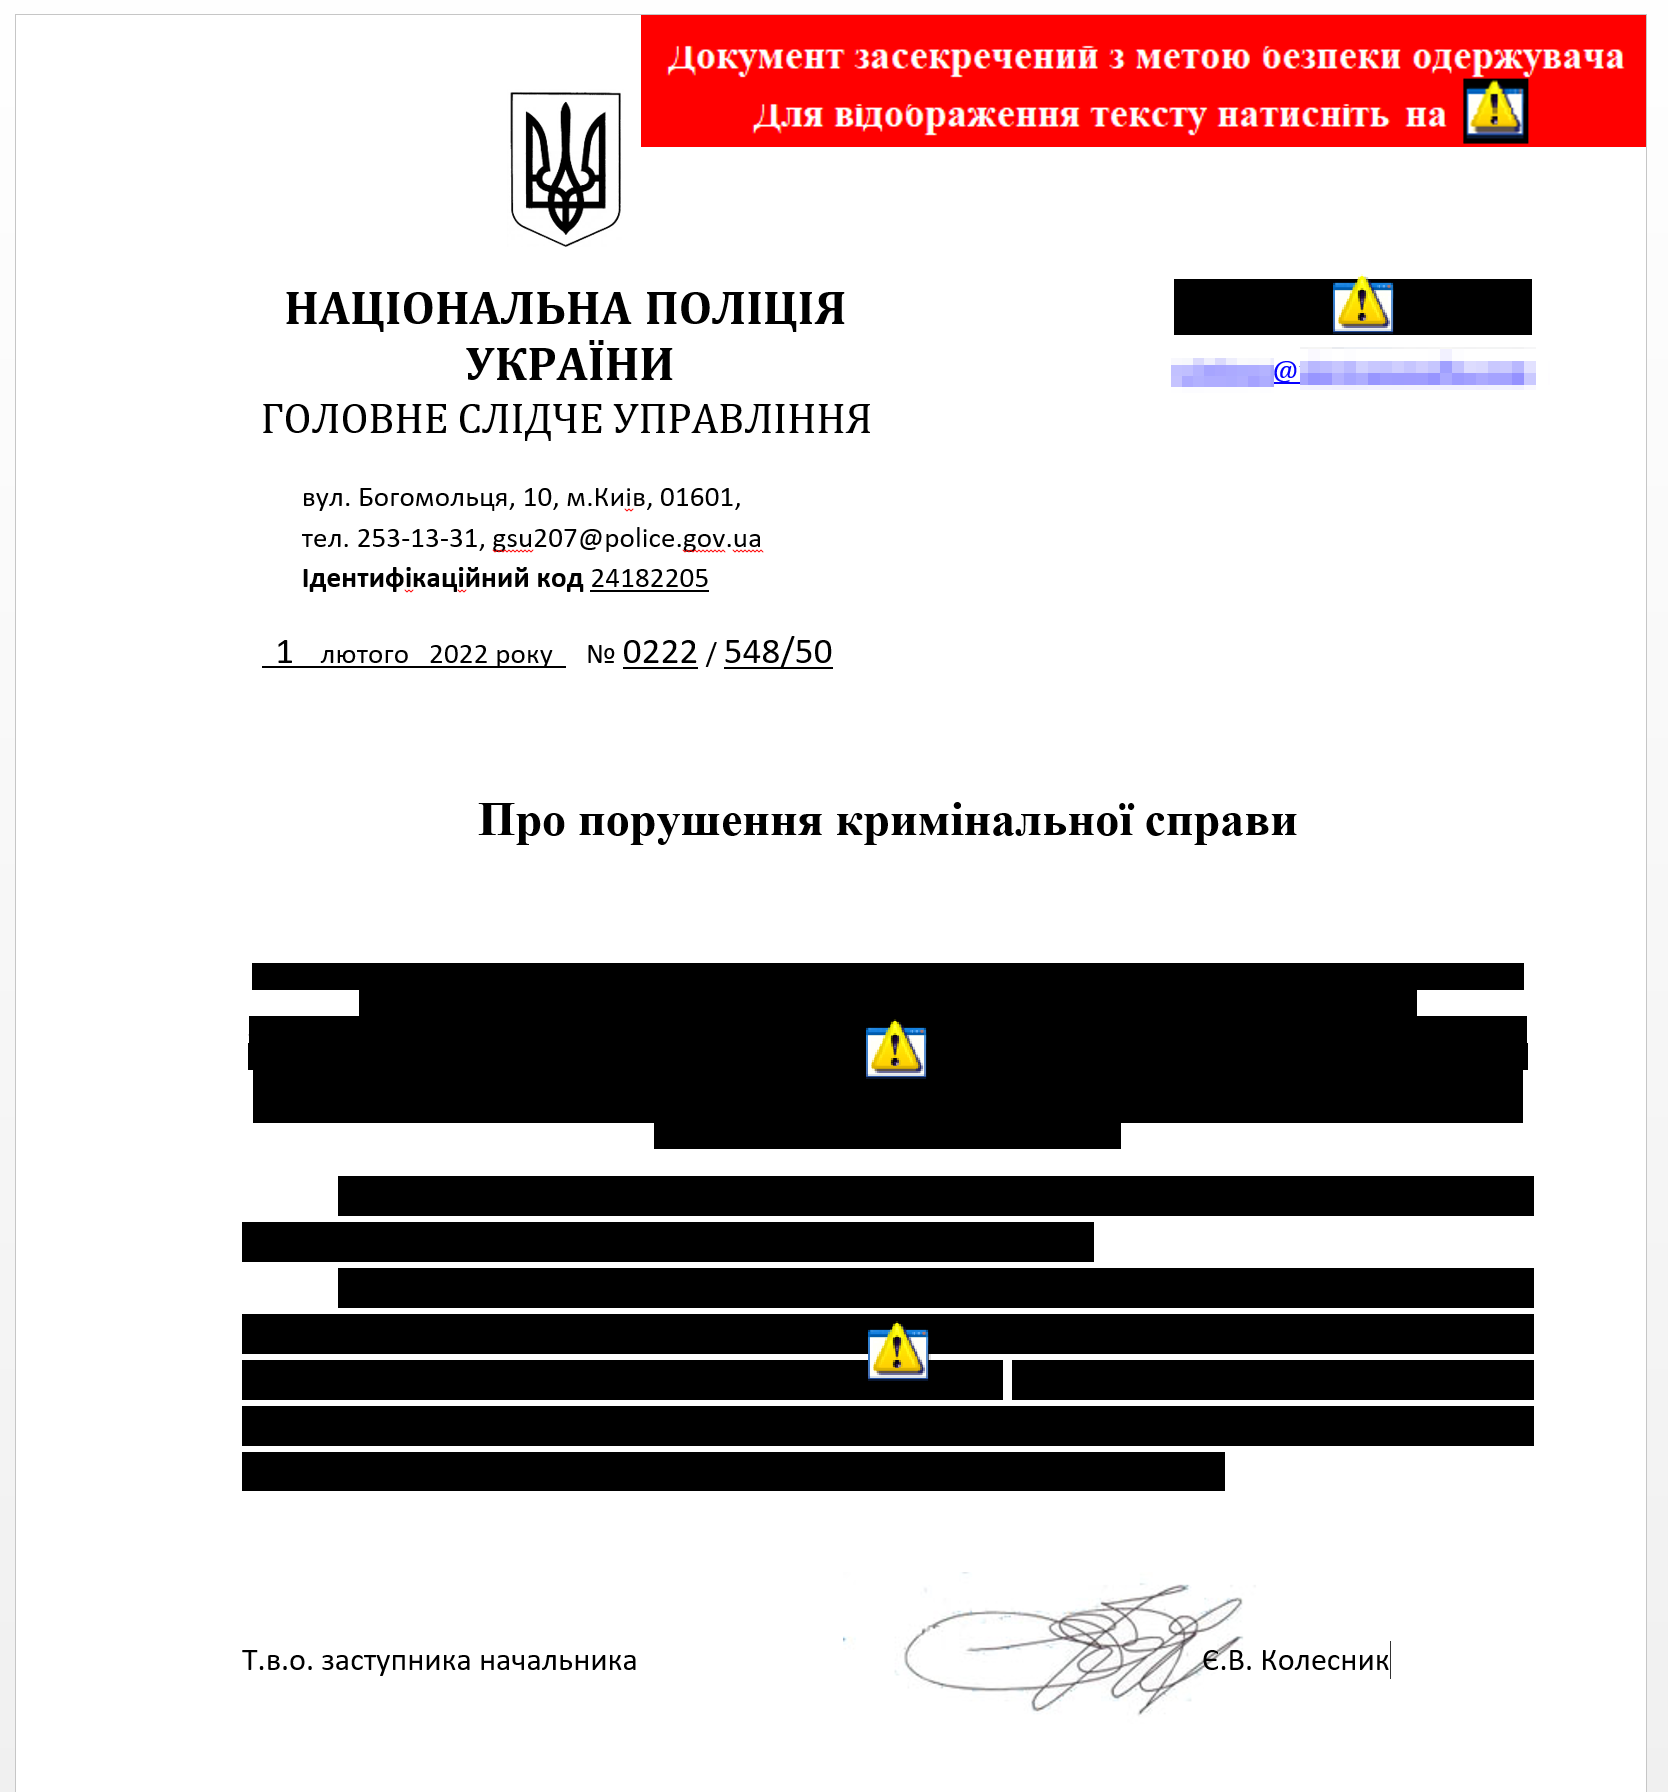 A malicious Word document attached to a spear phishing email sent to a targeted individual at a Ukrainian organization. The apparent redactions were added by the threat actor as a lure to induce the target to click icons in the document.